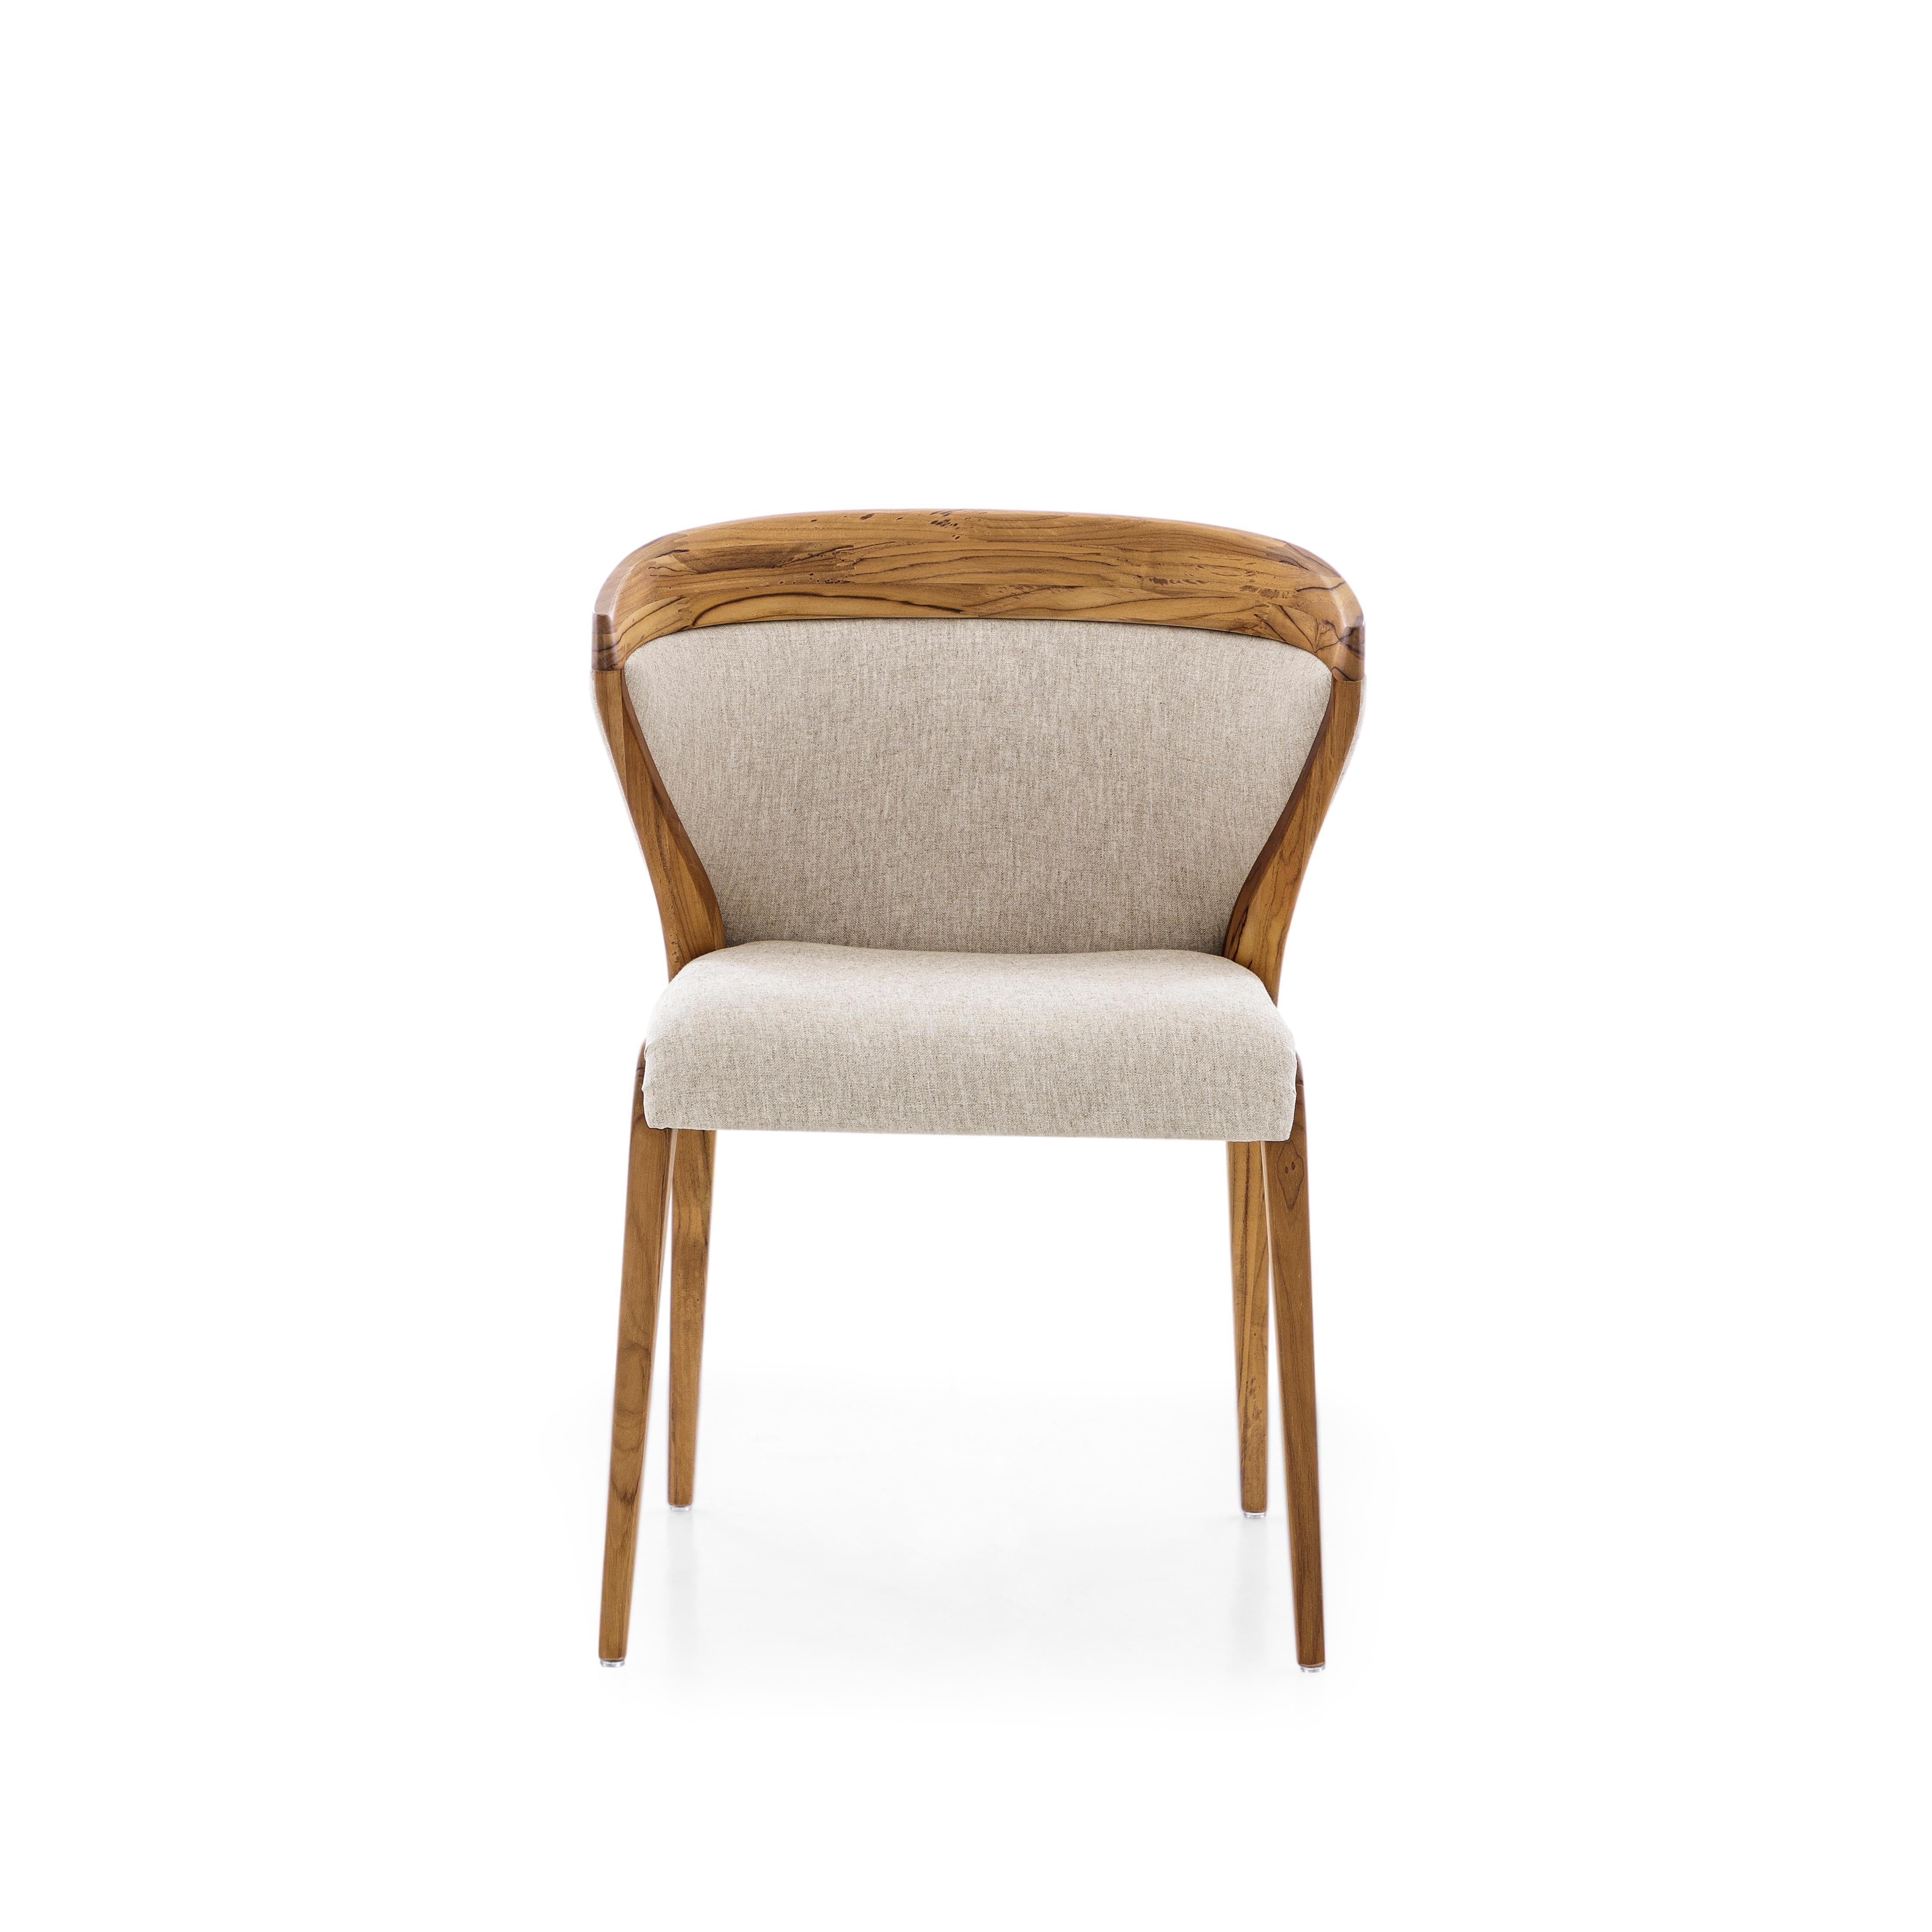 Contemporary Mat Dining Chair in Teak Wood Finish with Upholstered Back and Ivory Fabric Seat For Sale